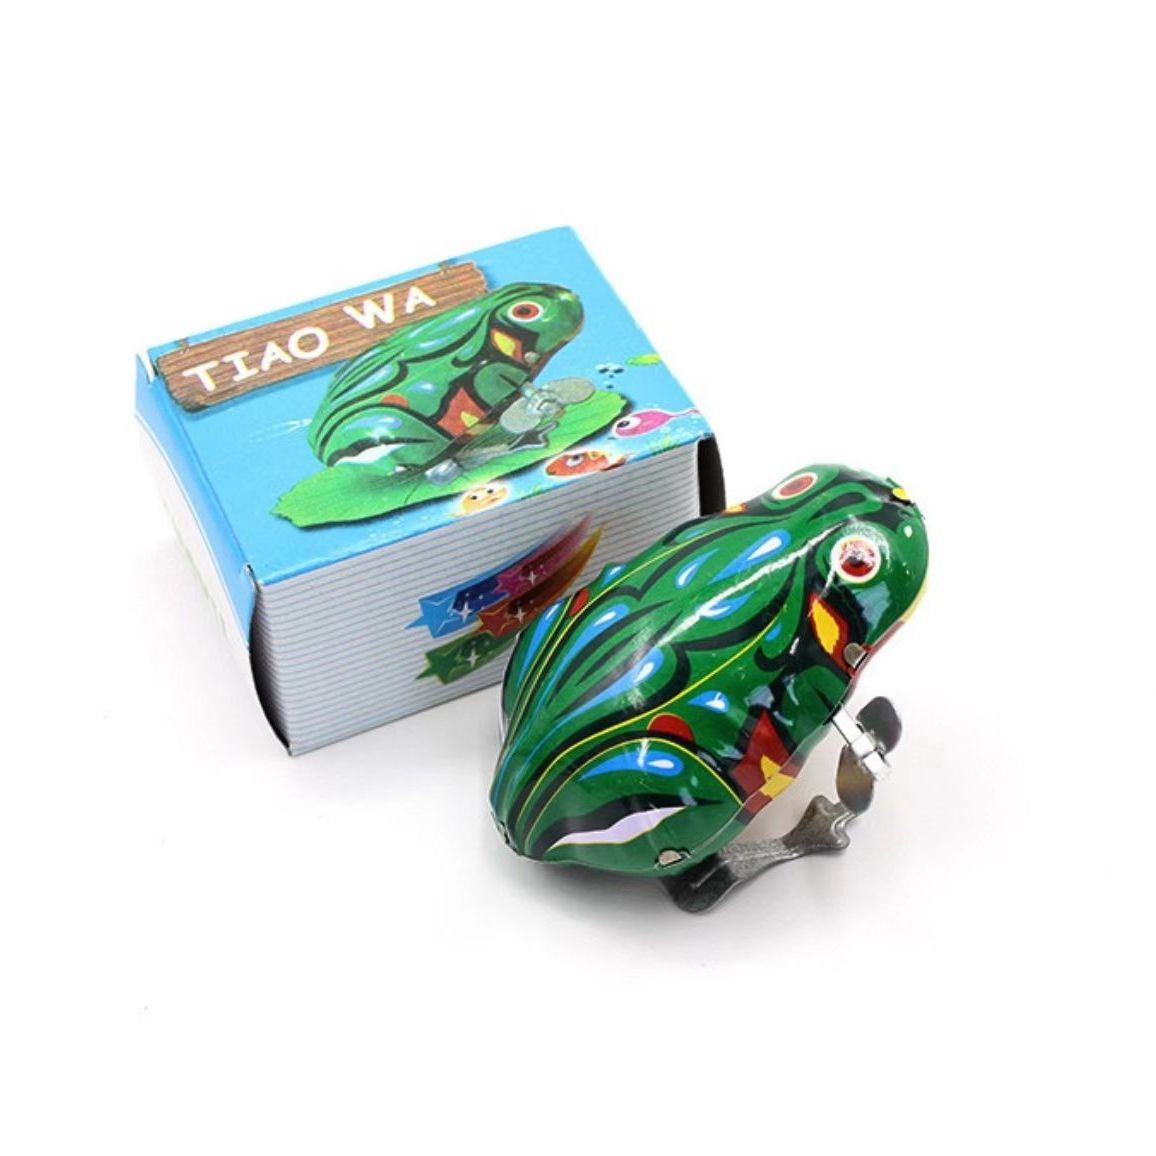 Wind Up Frog Toy; Jumping Frog Retro Toy; Green Metal Jumping Frog; Interesting Toys For Kids Gift